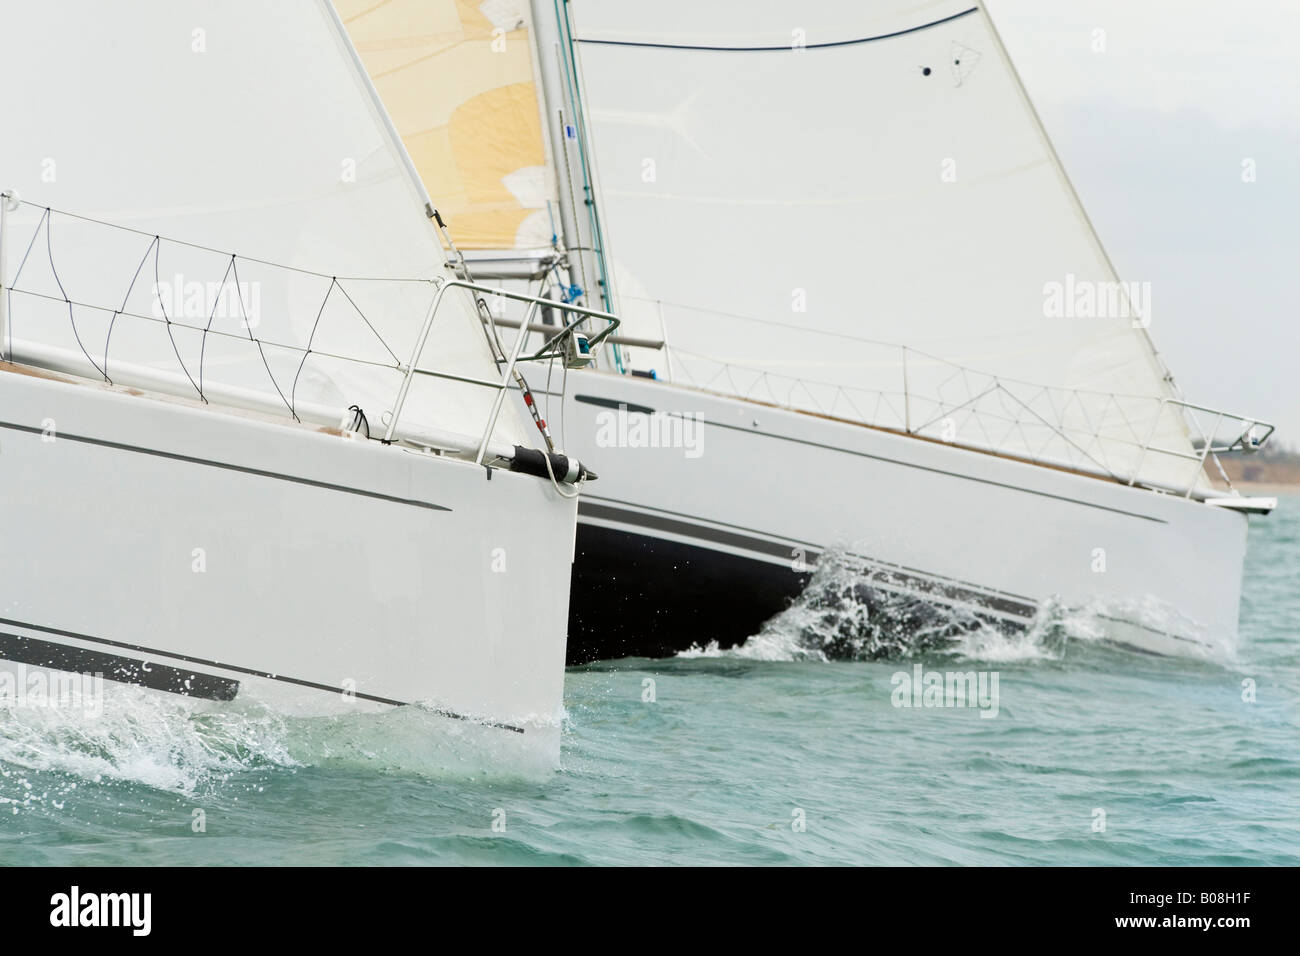 Close up on the bows of two racing yachts in close competition Stock Photo